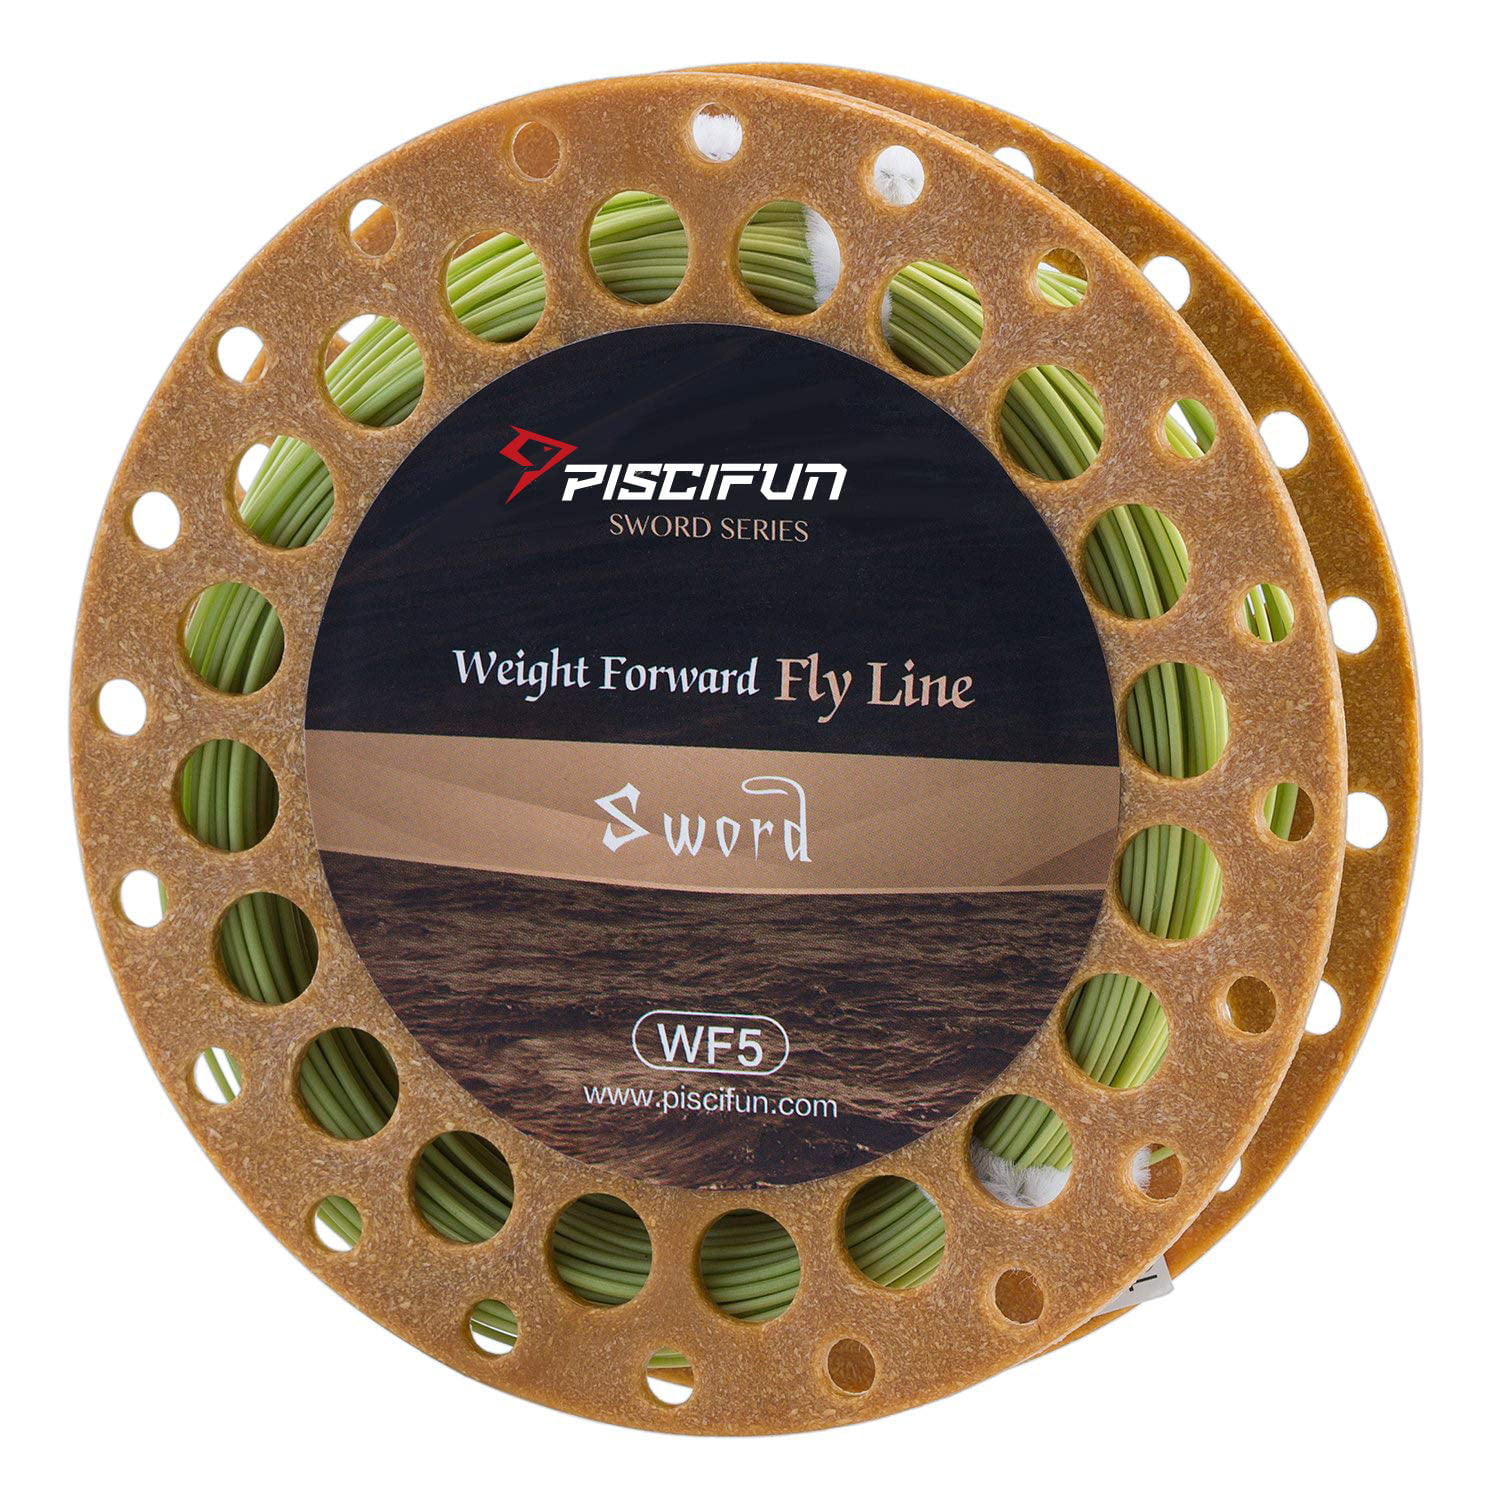 Piscifun Sword Weight Forward Floating Fly Fishing Line with Welded Loop  WF5wt 100FT Moss Green 